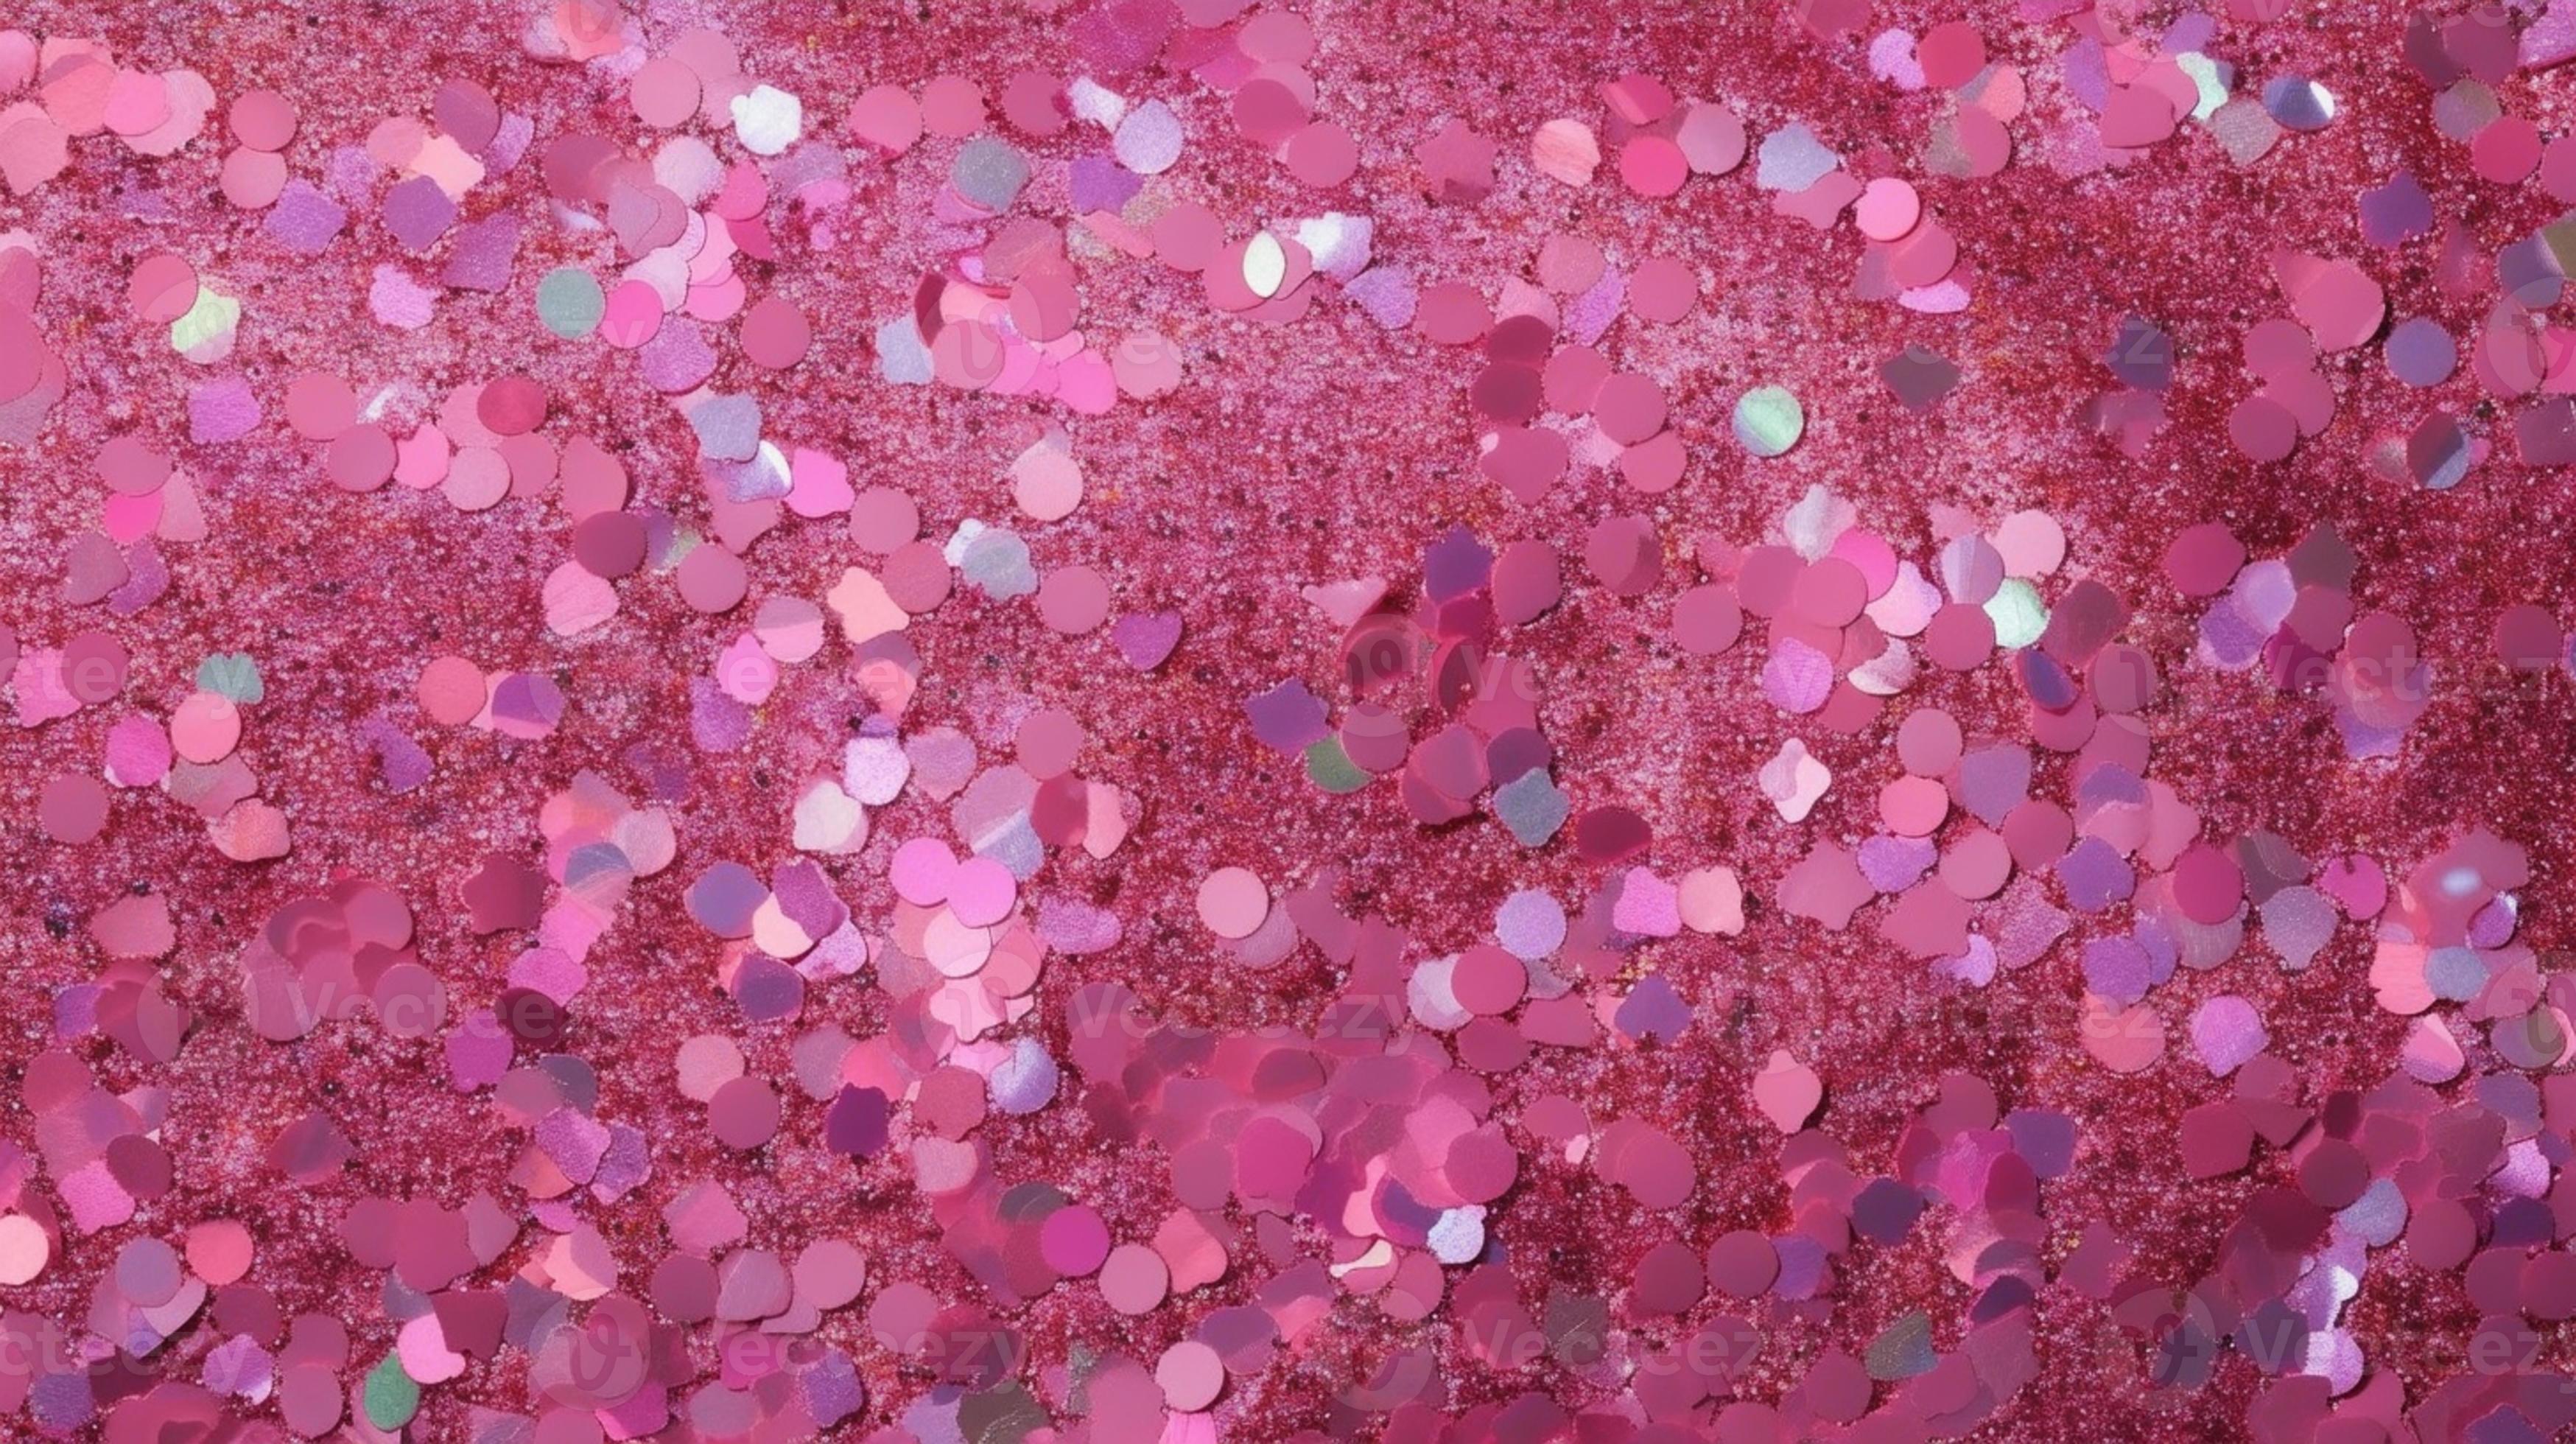 Download free image of Shiny pink glitter textured background by Teddy  about pink glitter bac…